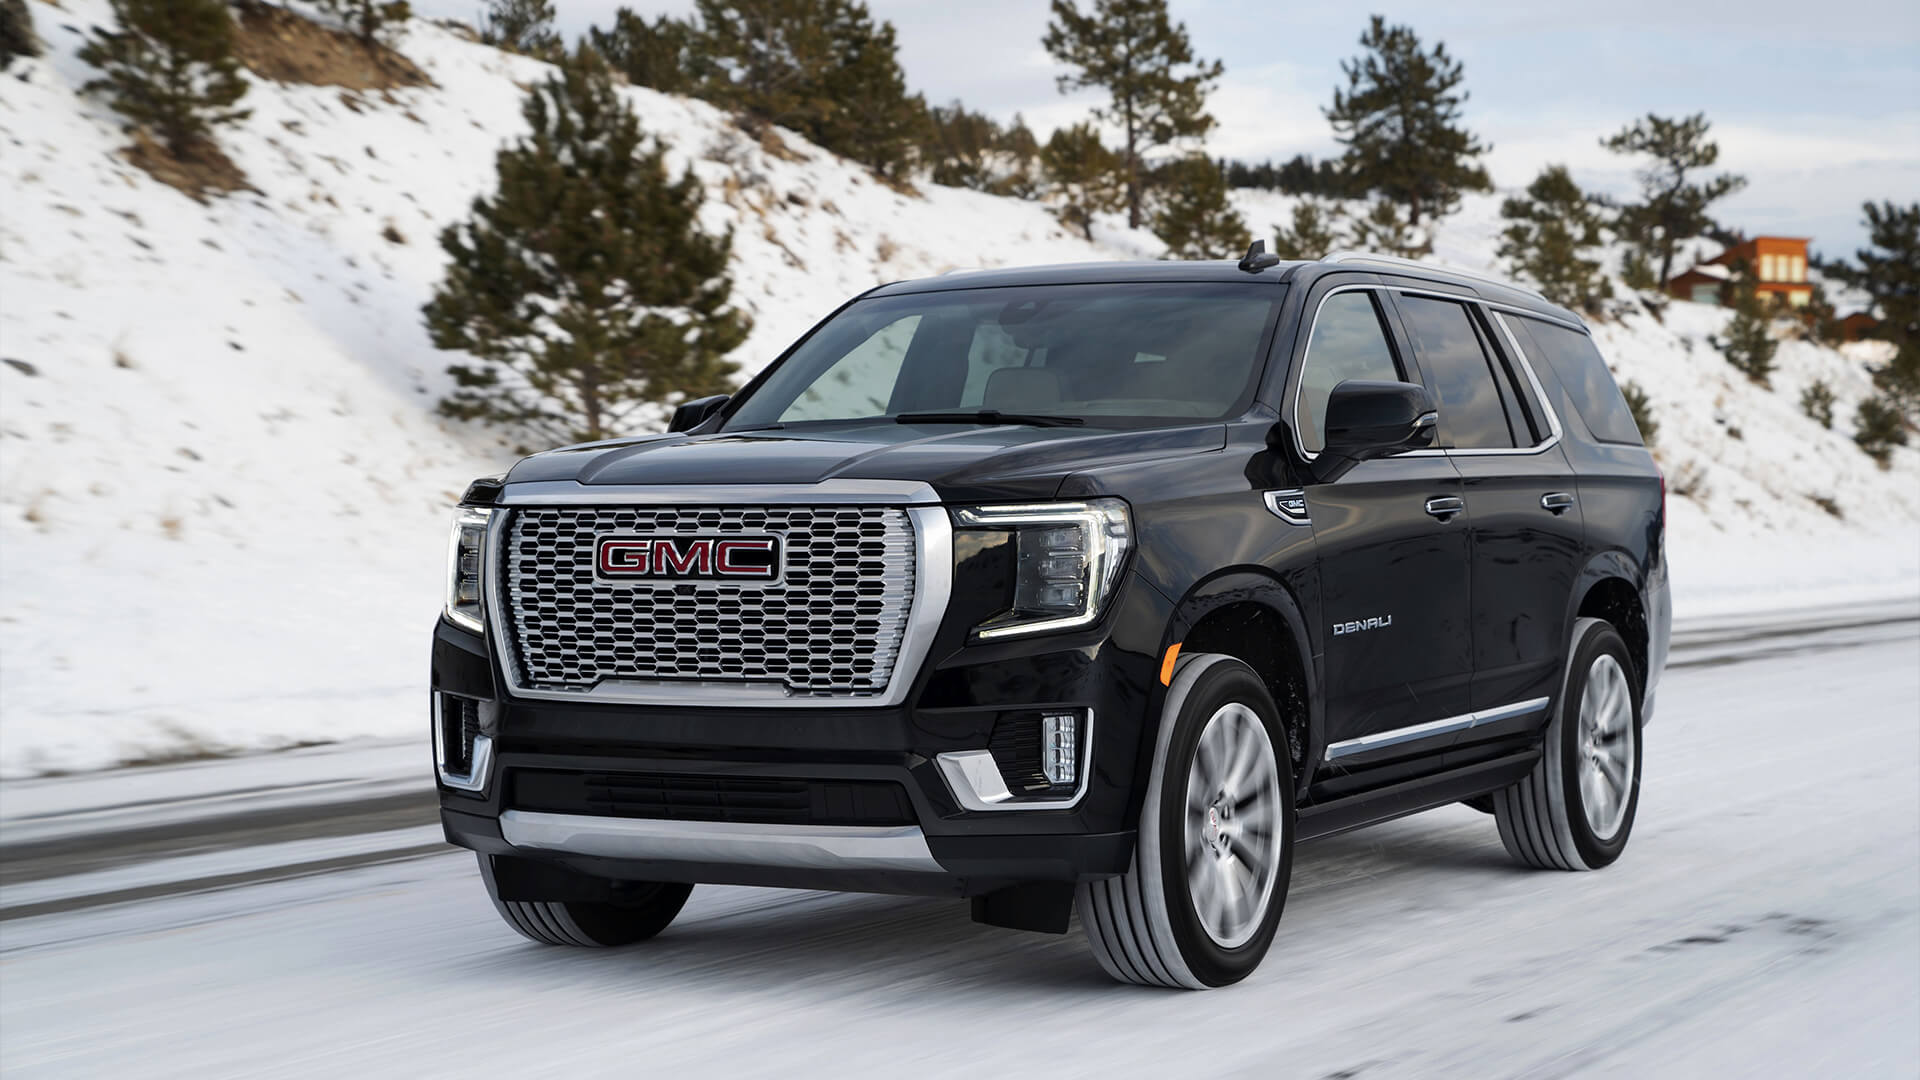 2020 Yukon Denali overview, specifications, colour variants, features |  Automart USA